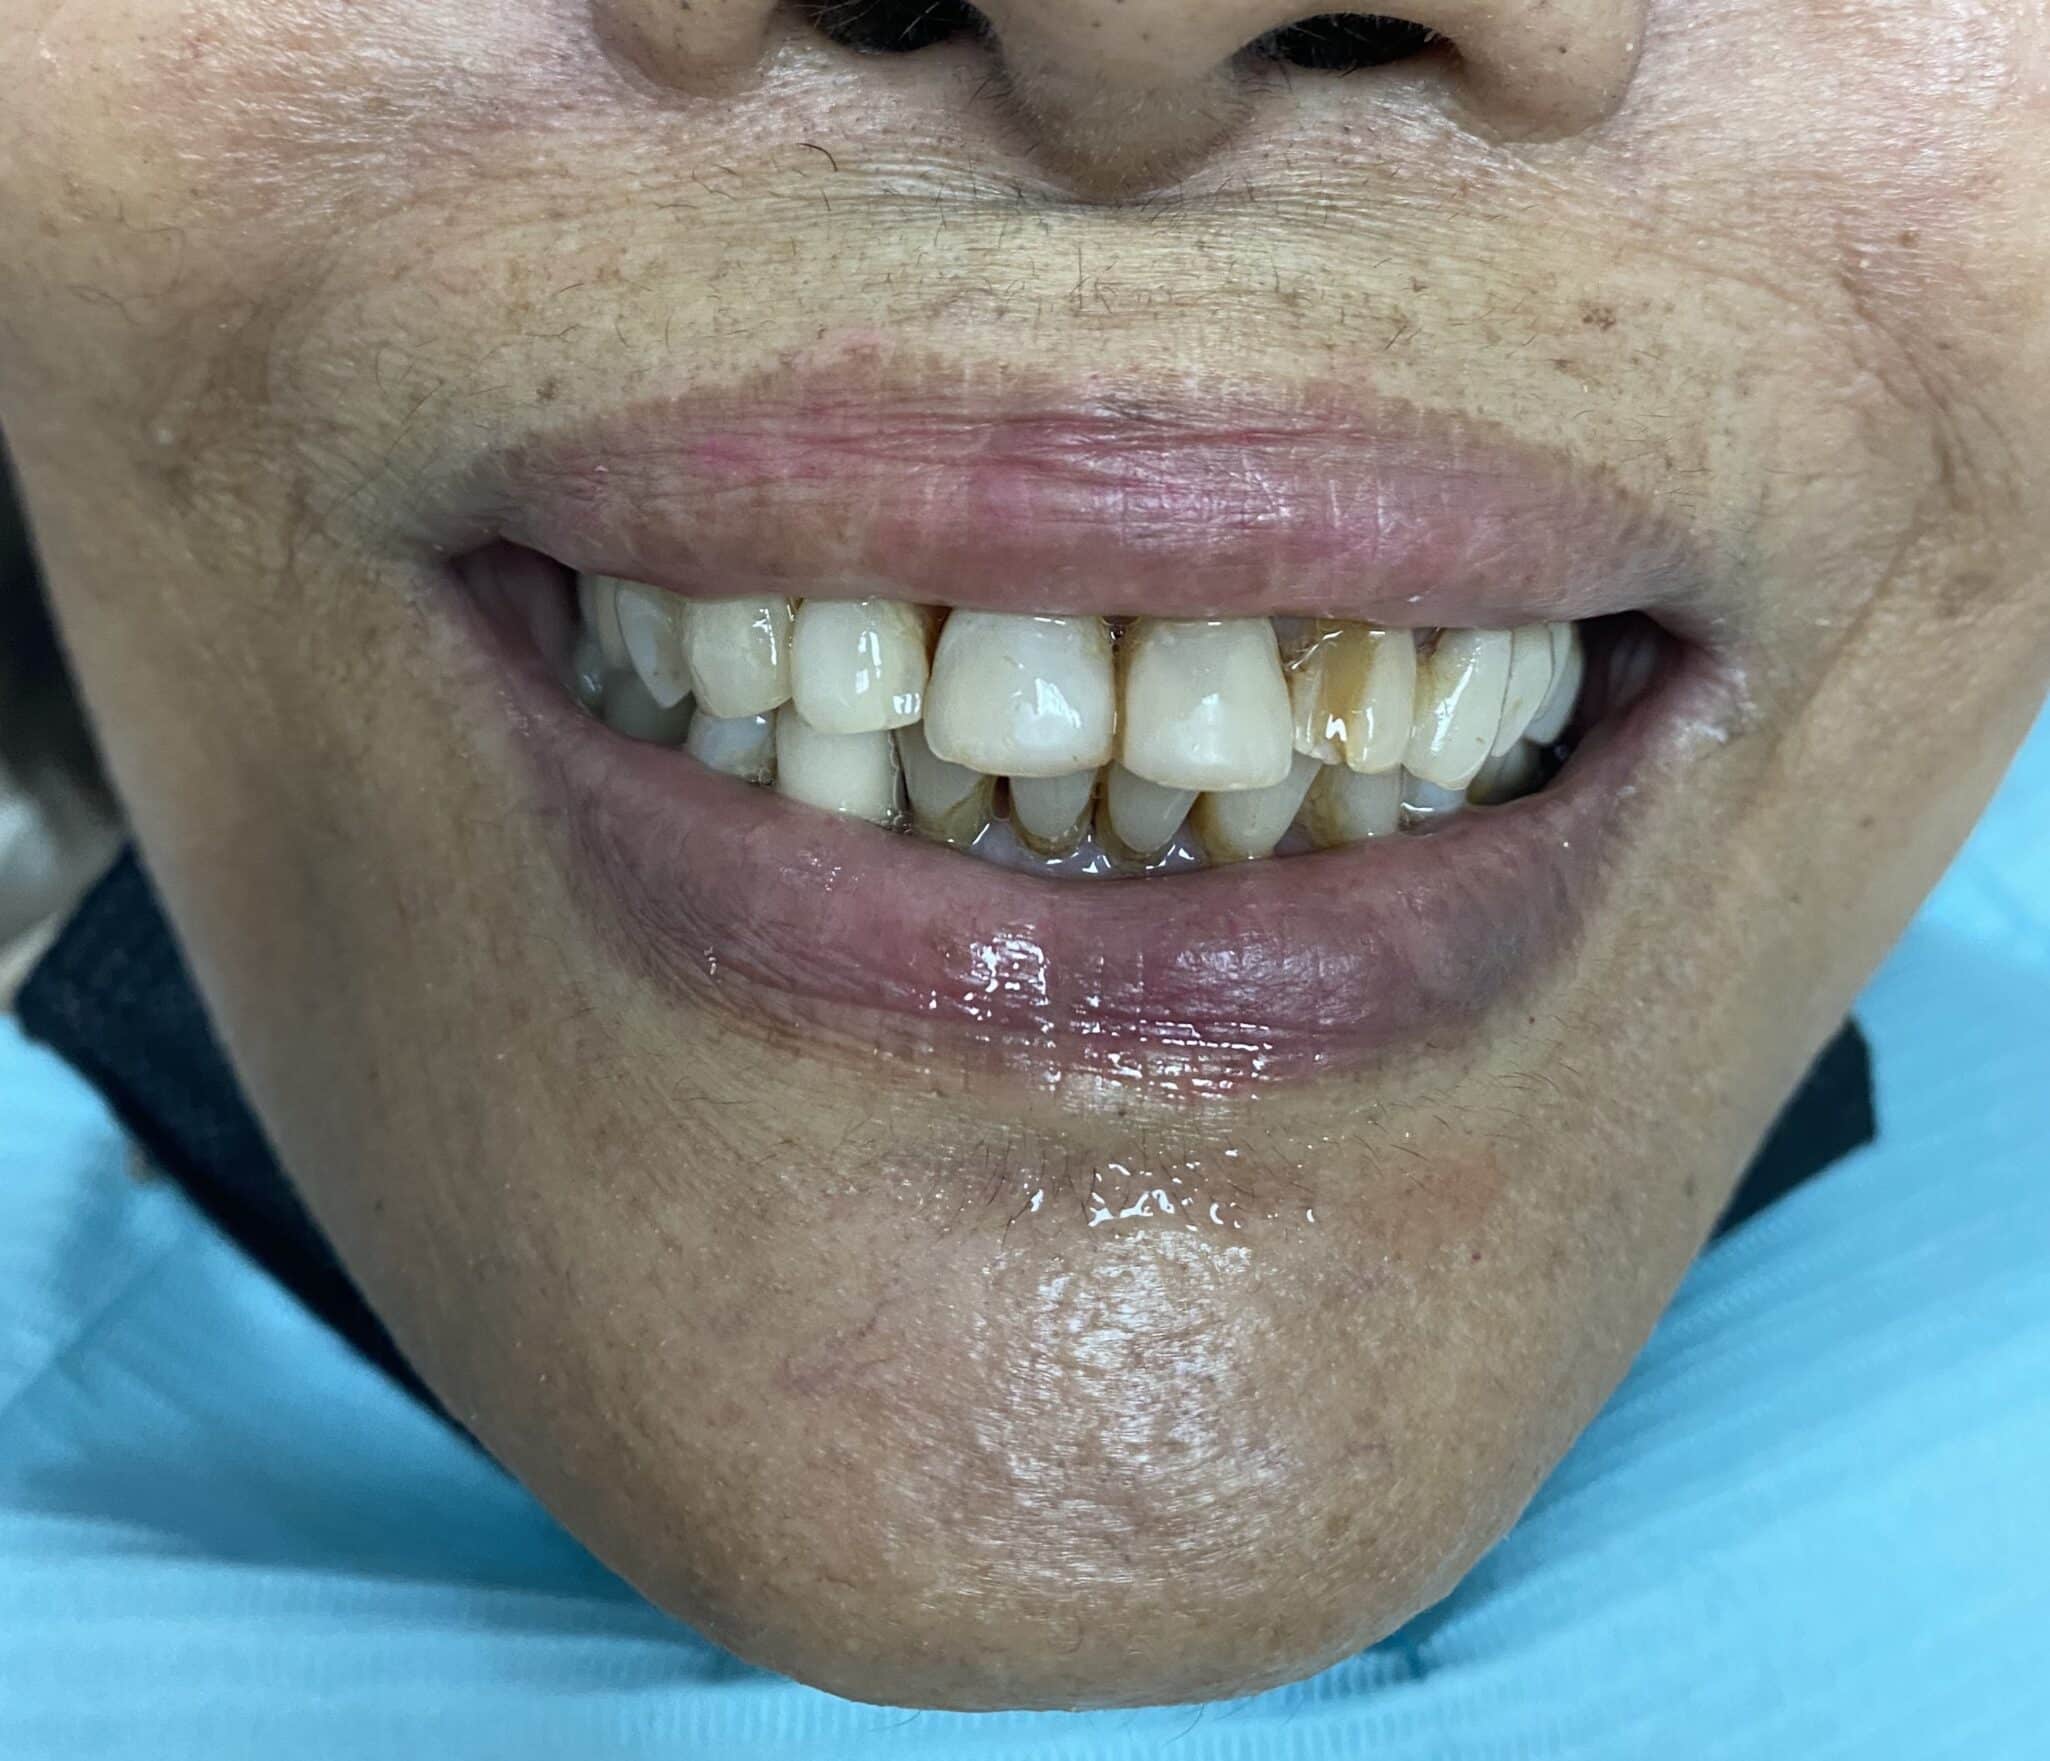 Full-Arch FP-1 Fixed Oral Zirconia Bridge Prosthesis with 10 implants in the Upper Arch